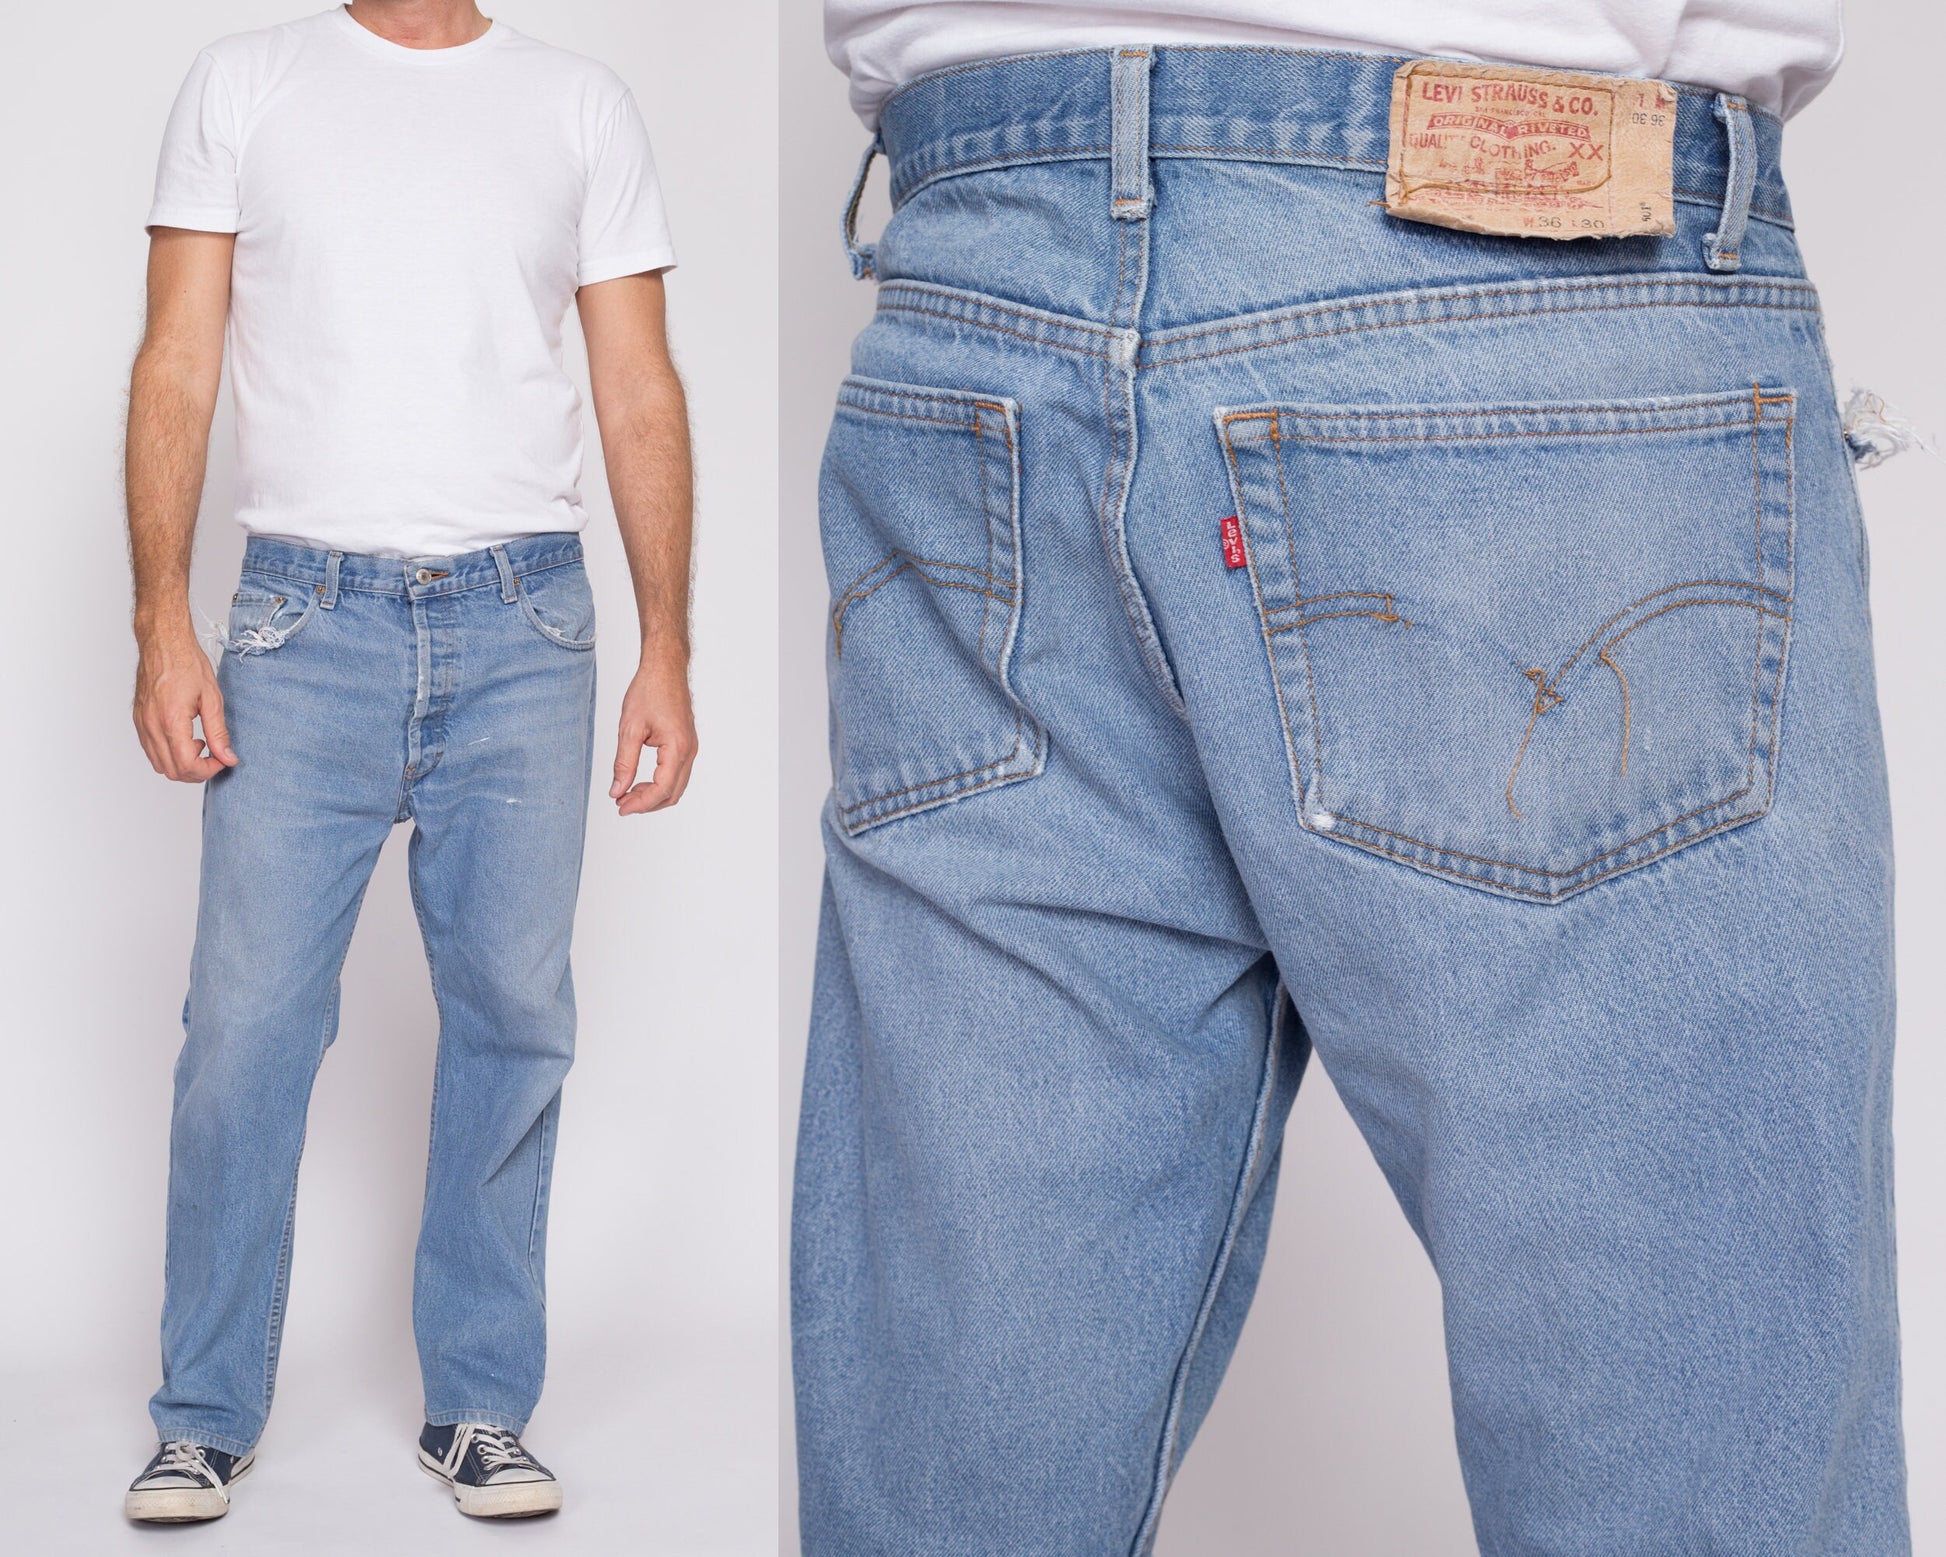 36x30 Vintage Levis 501 Distressed Jeans | 80s 90s Made In USA Light Wash Straight Leg Denim